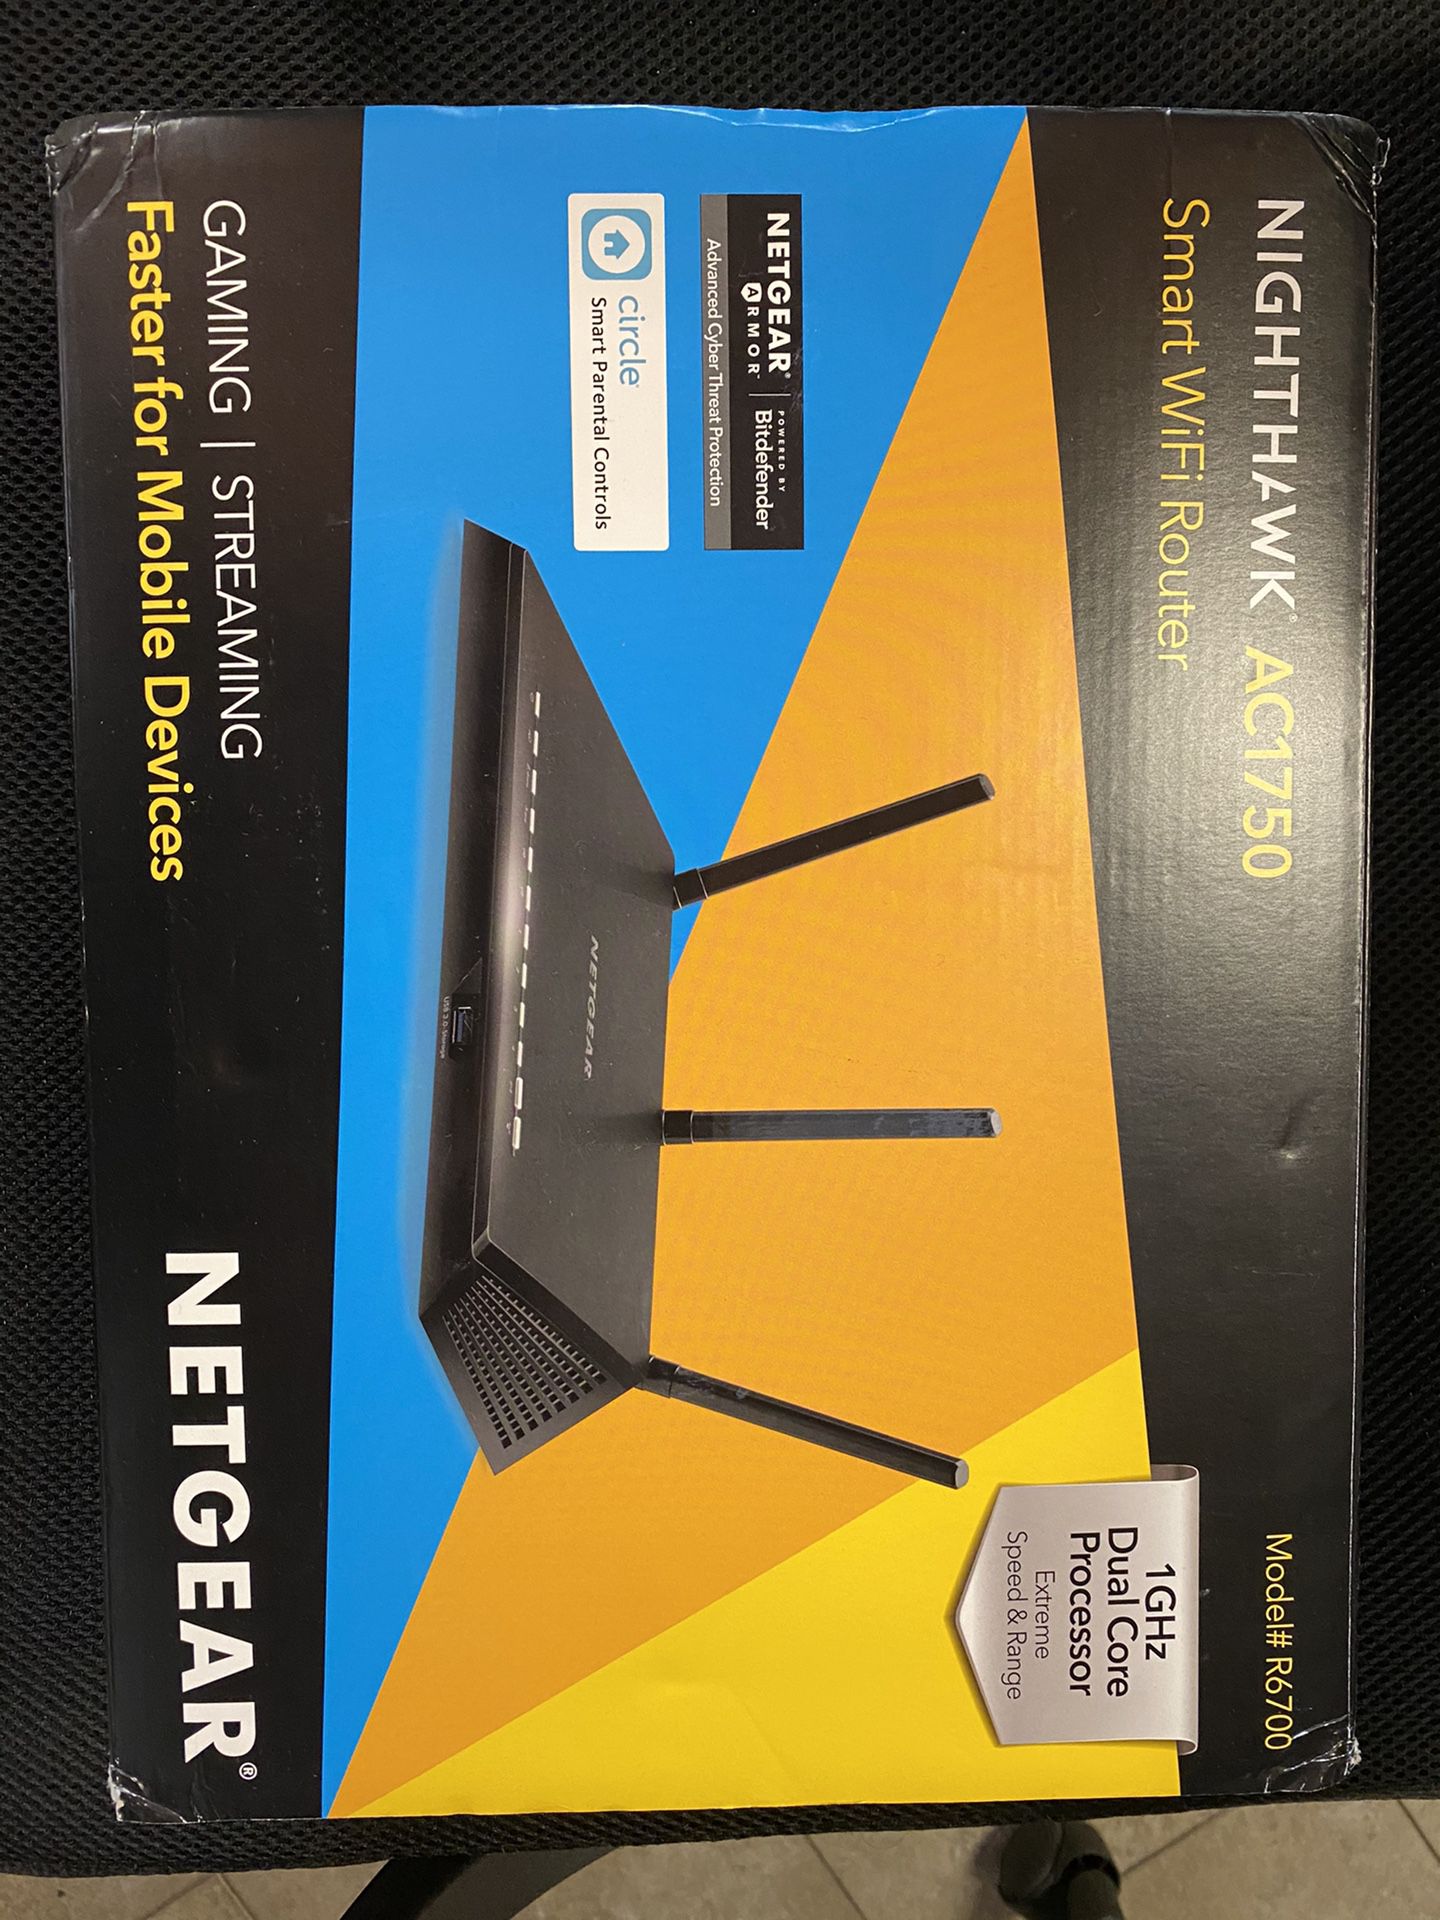 Netgear nighthawk ac1750 r6700.new router. Open box. Tested working. No connection issues.